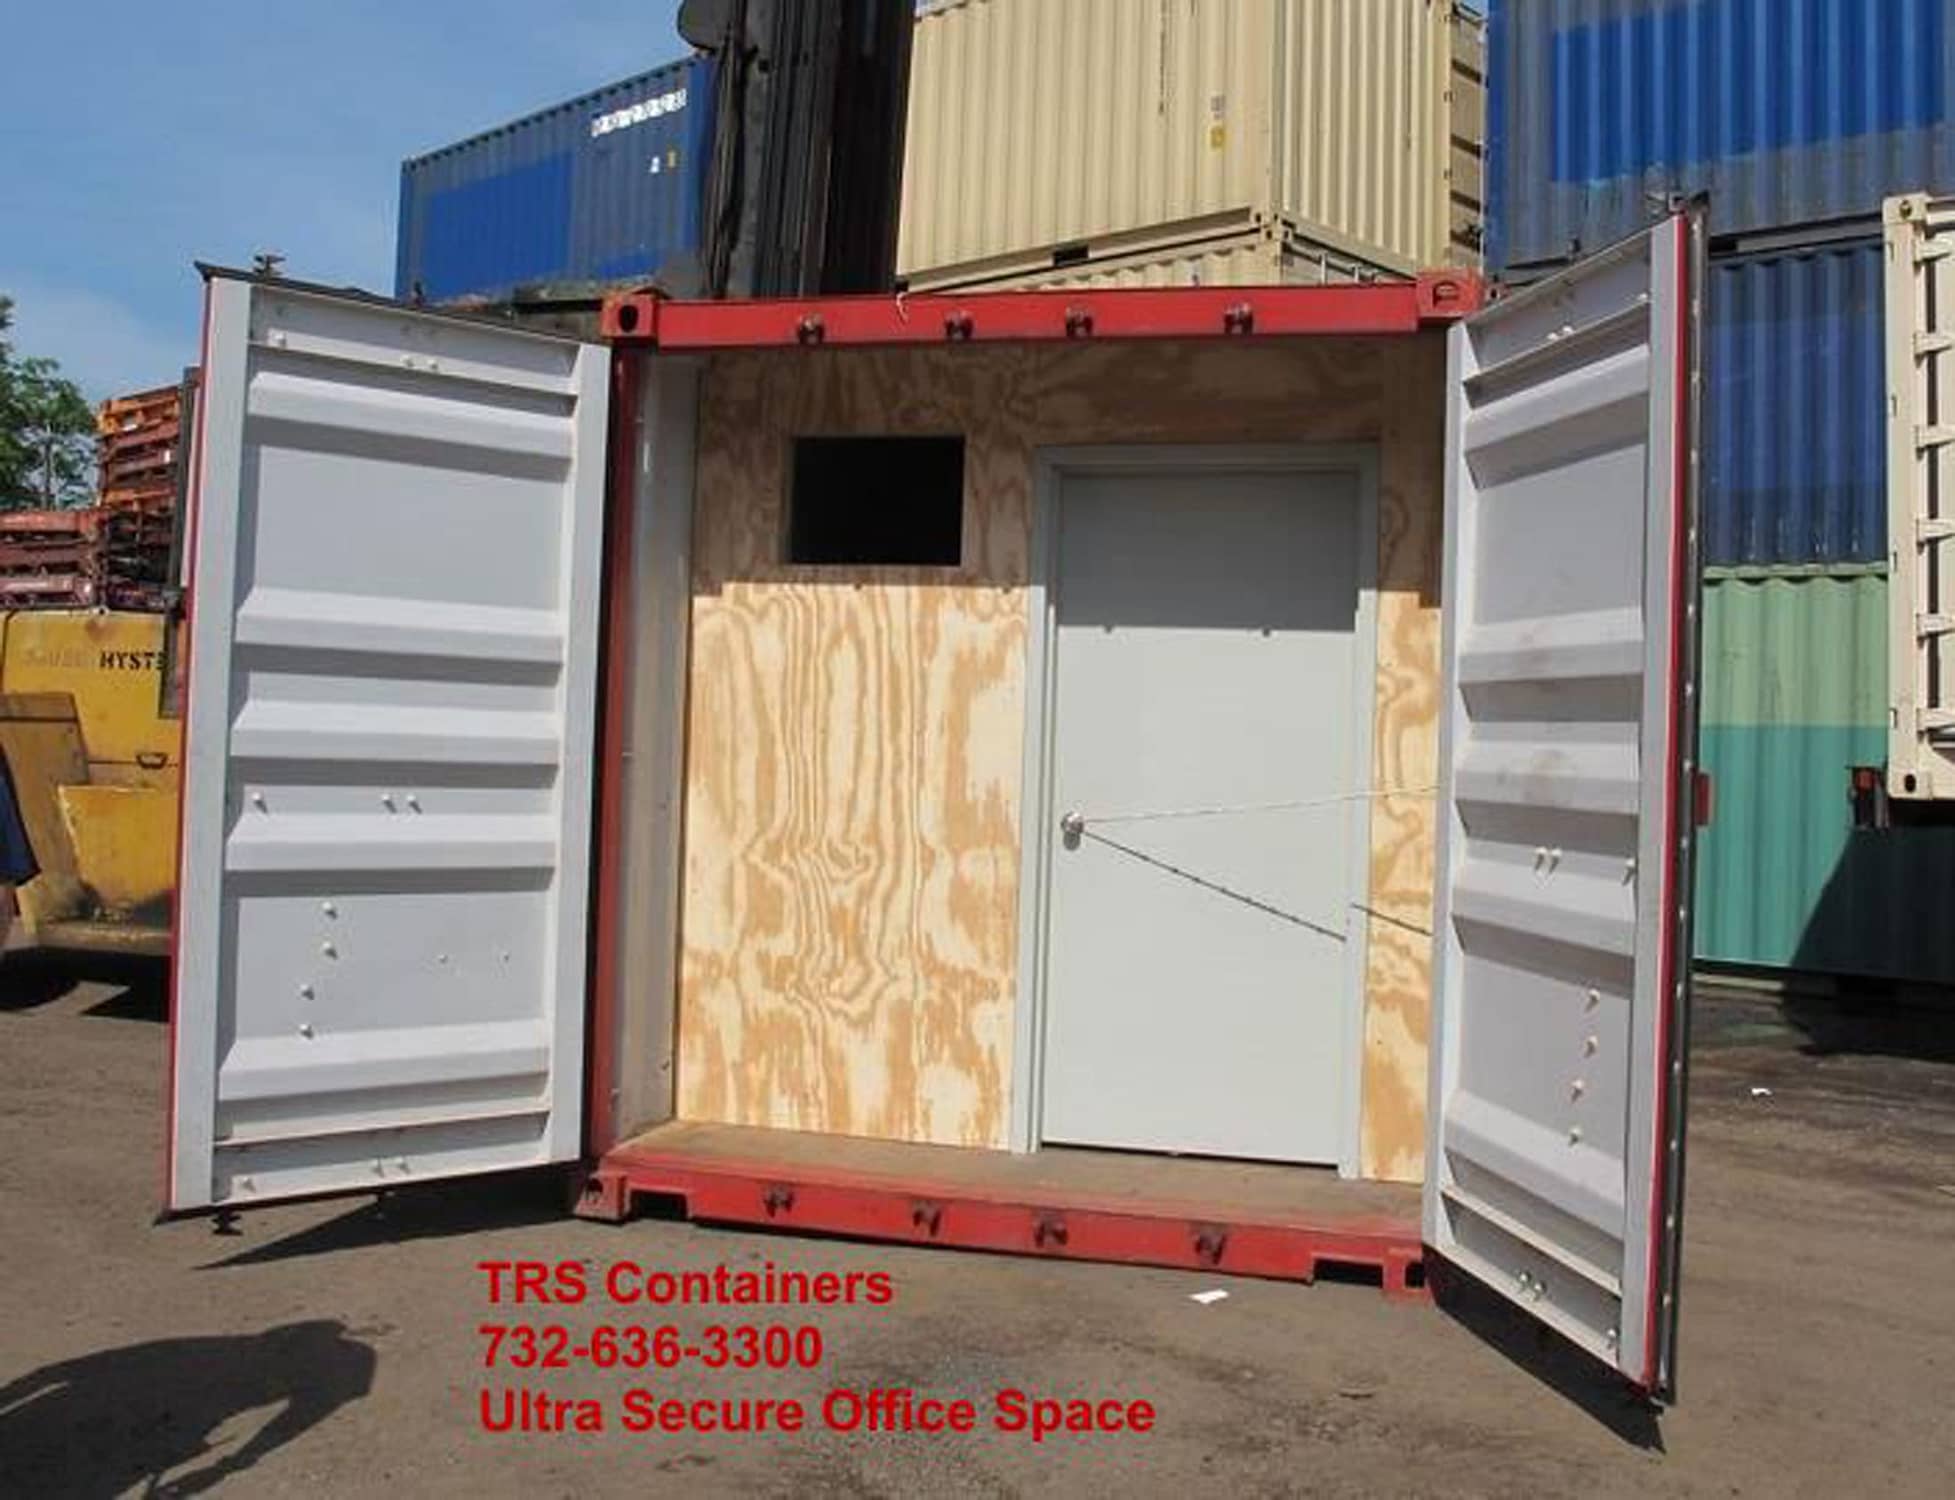 TRS containers can modify an office container totally secure with inteior door for access during the day